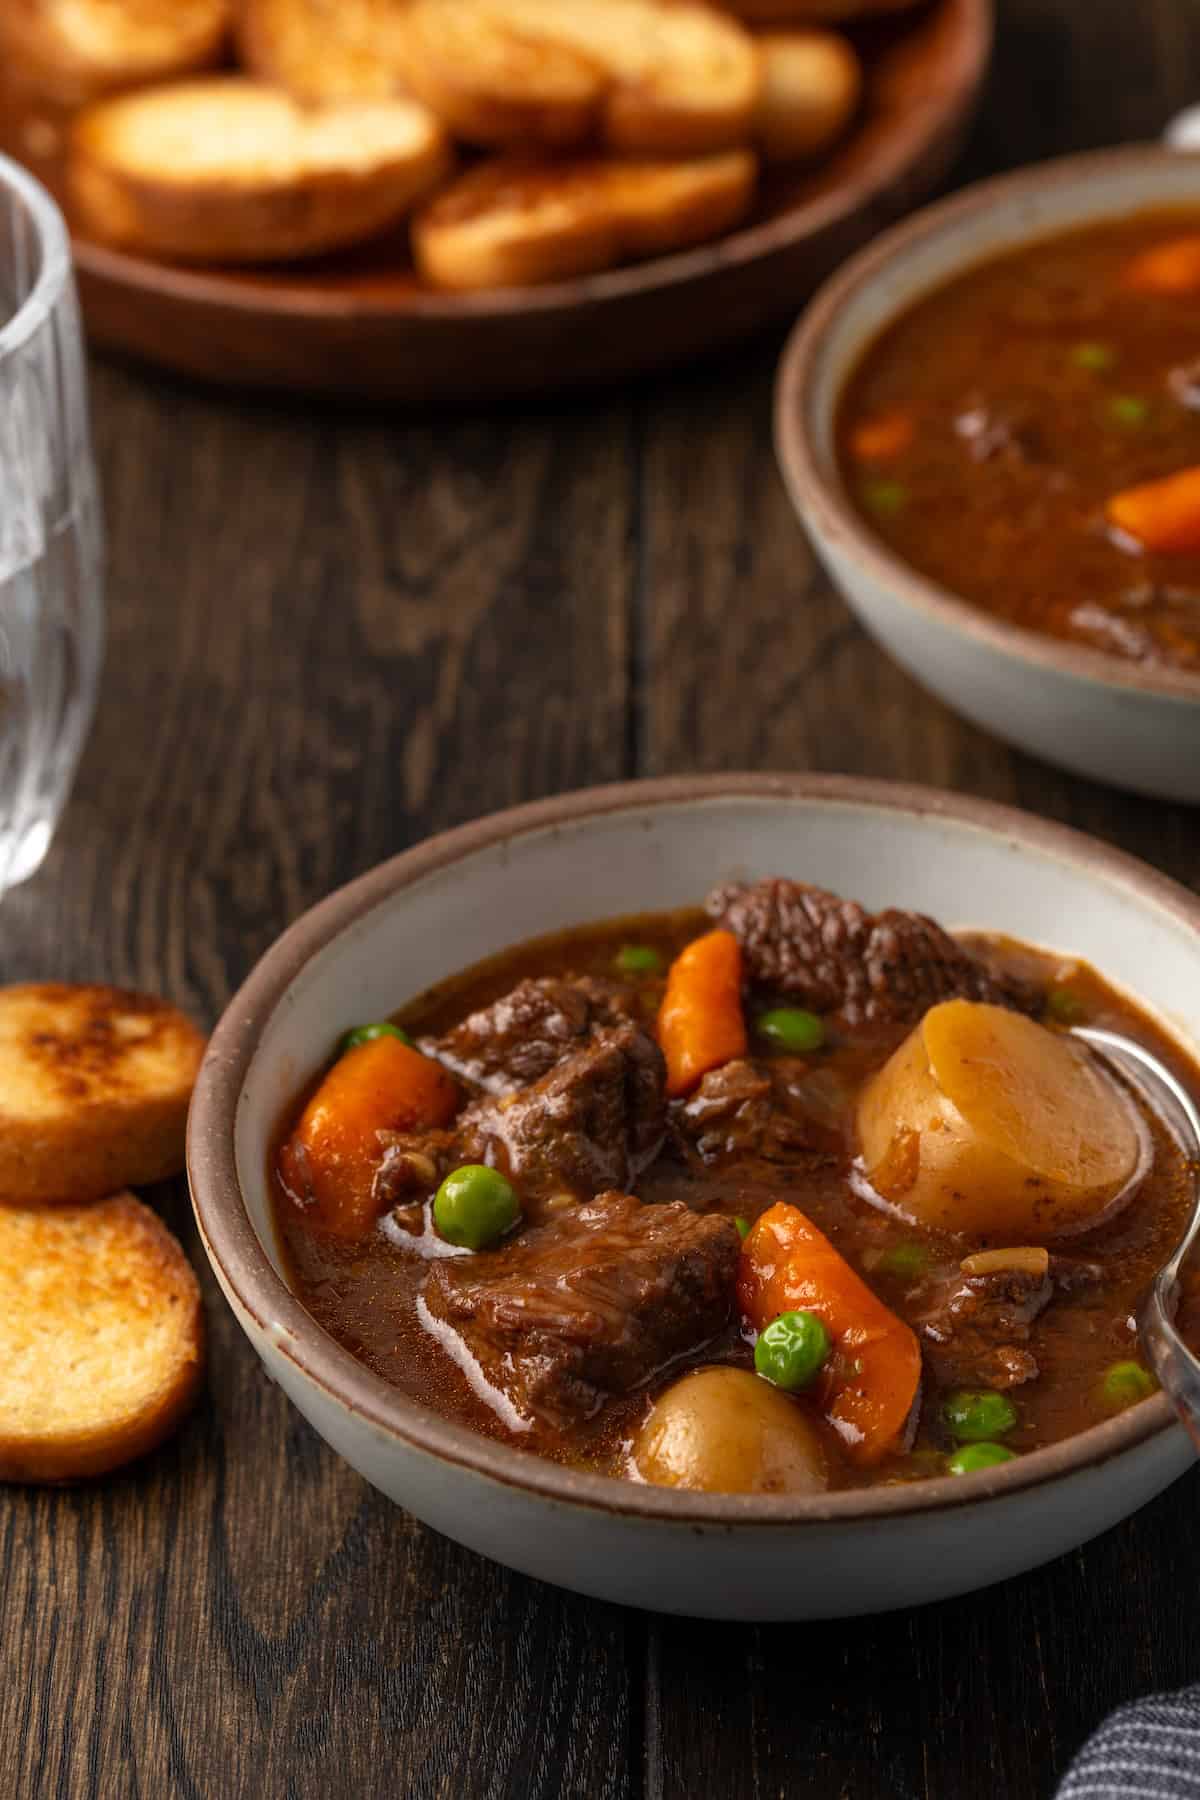 A bowl of Instant Pot beef stew on a wooden tabletop, with a plate of crostini in the background.